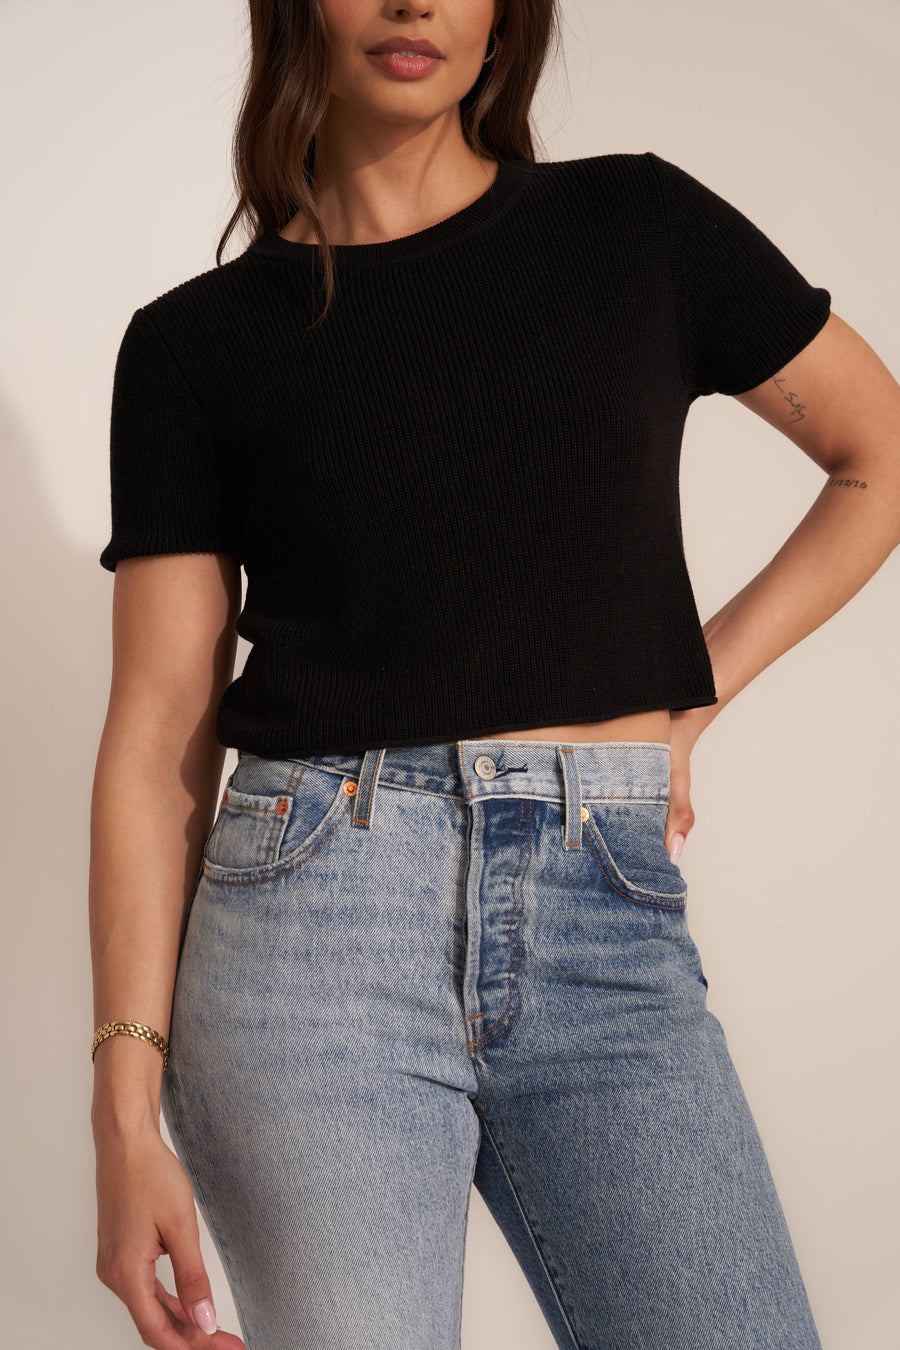 The Knit Tee - Black